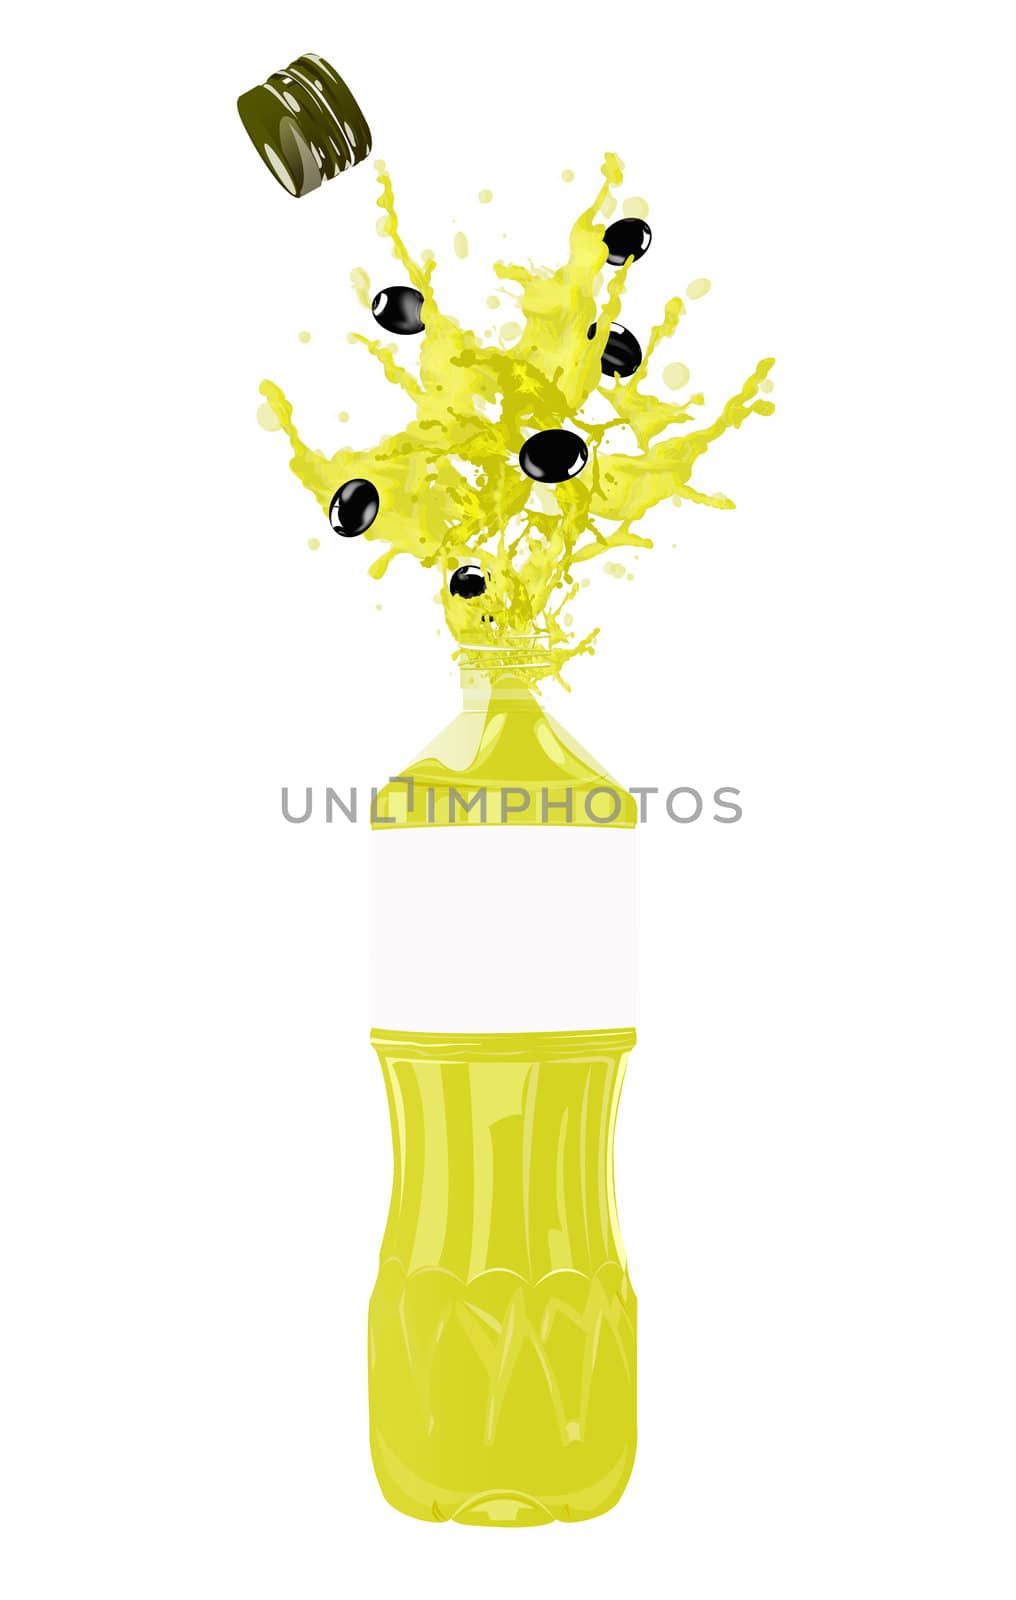 Bottle of oil olive on a white background